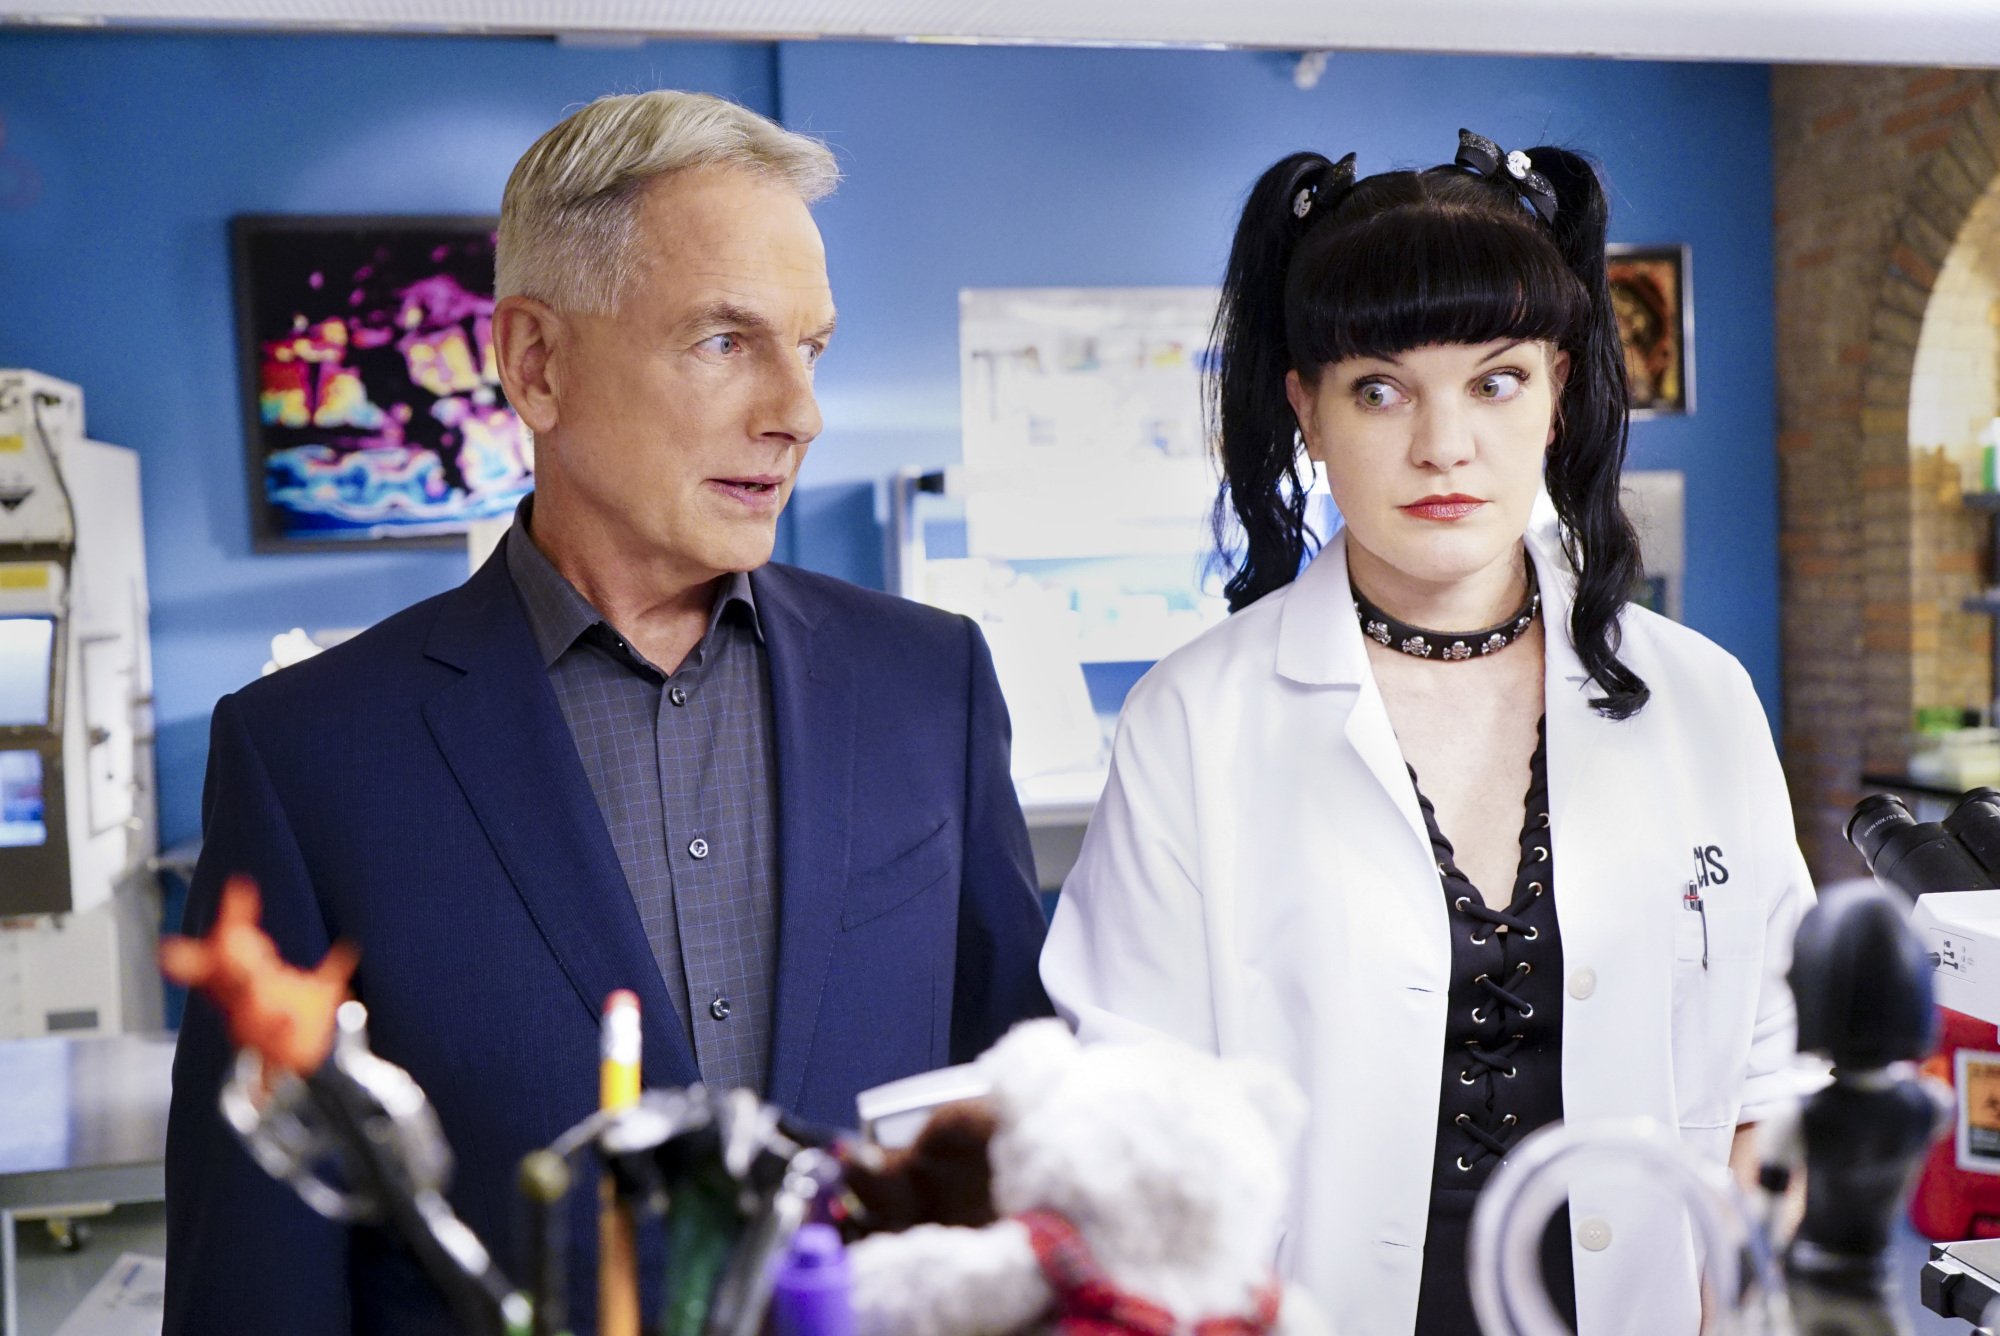 Pauley Perrette as Abby and Mark Harmon as Agent Gibbs on "NCIS." | Photo: Getty Images